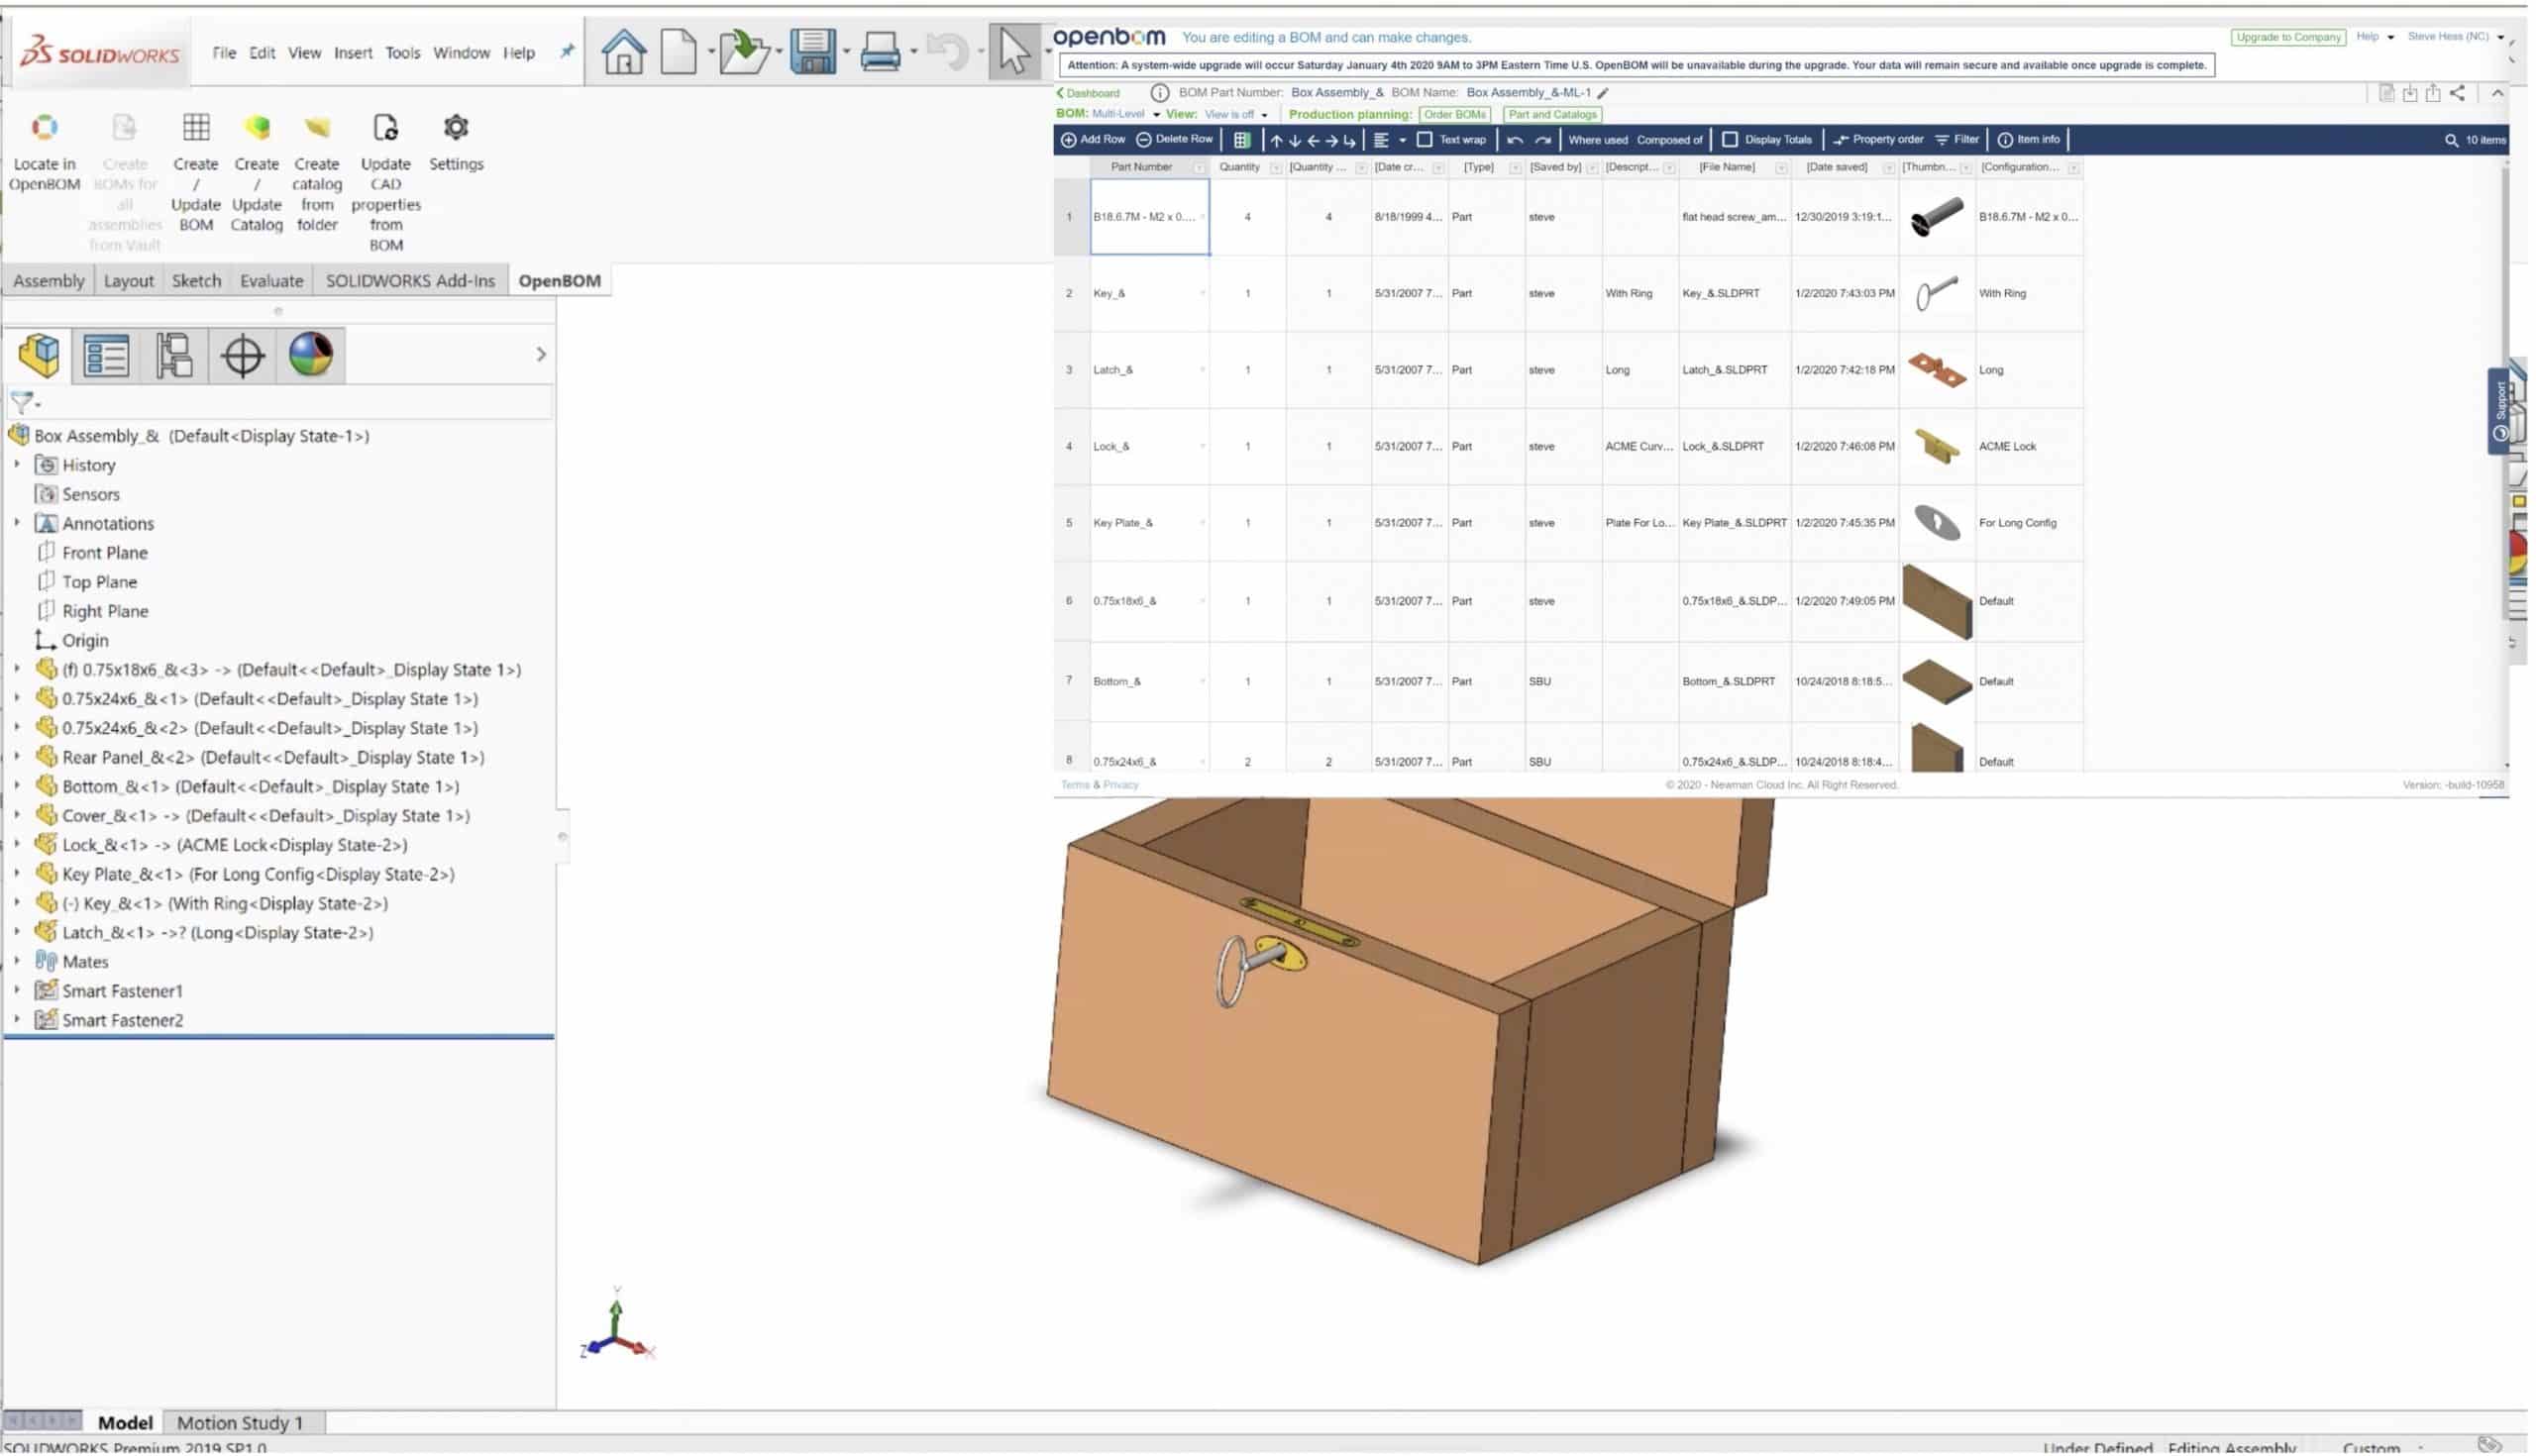 Heads up: New Solidworks Add-in Settings and Data Model